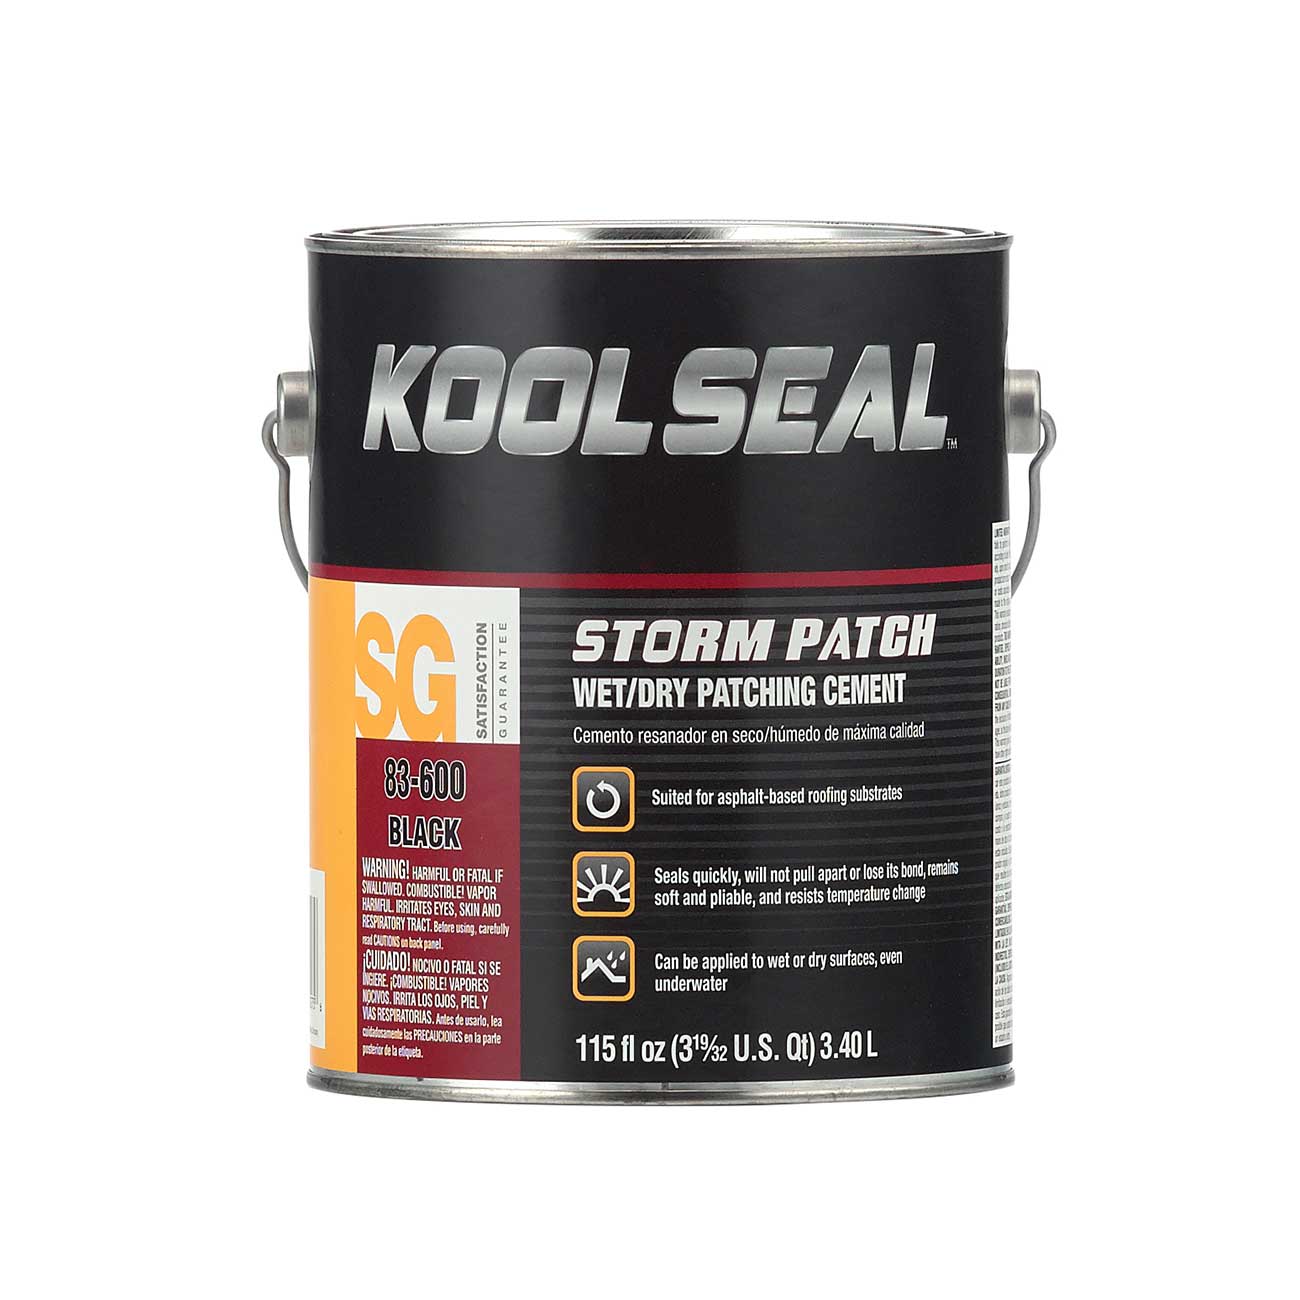 Kool Seal SP Wet/Dry Patching Cement